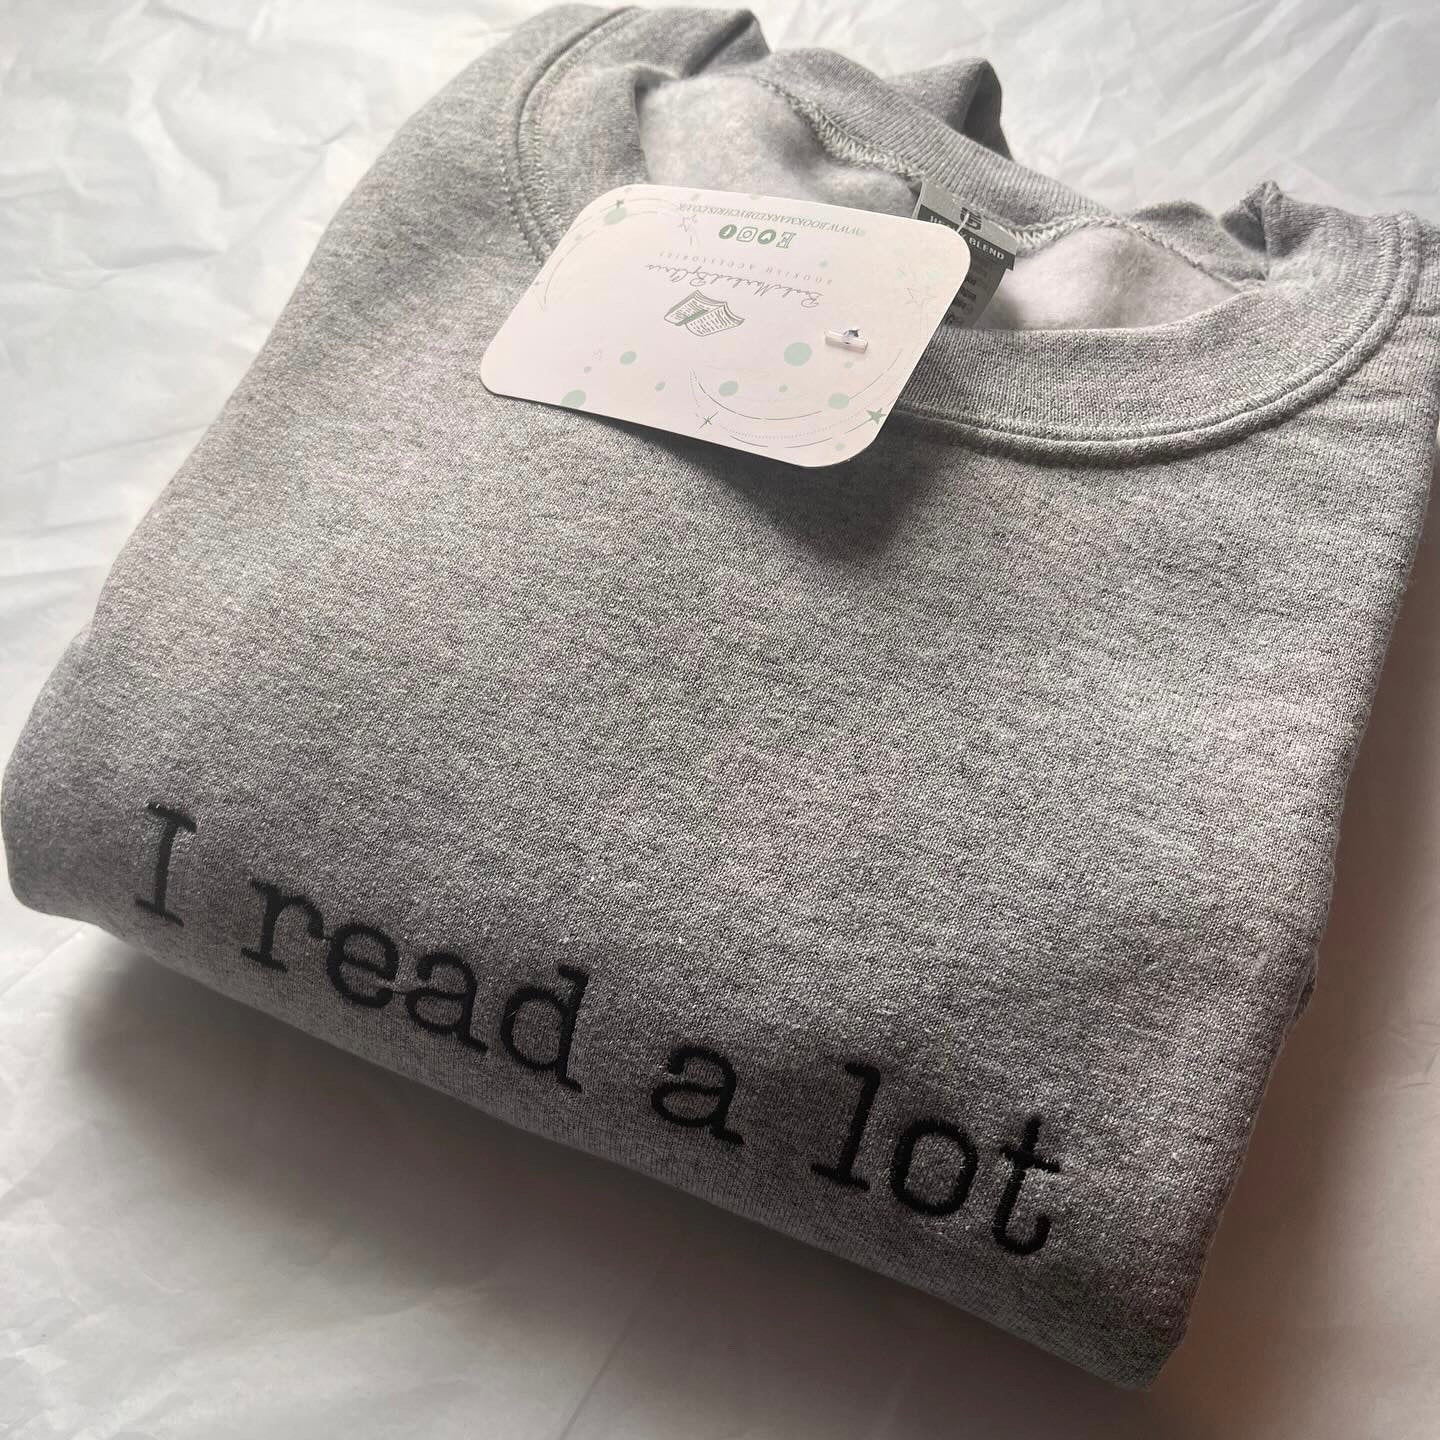 I Read A Lot - BookmarkedbyChris Collab